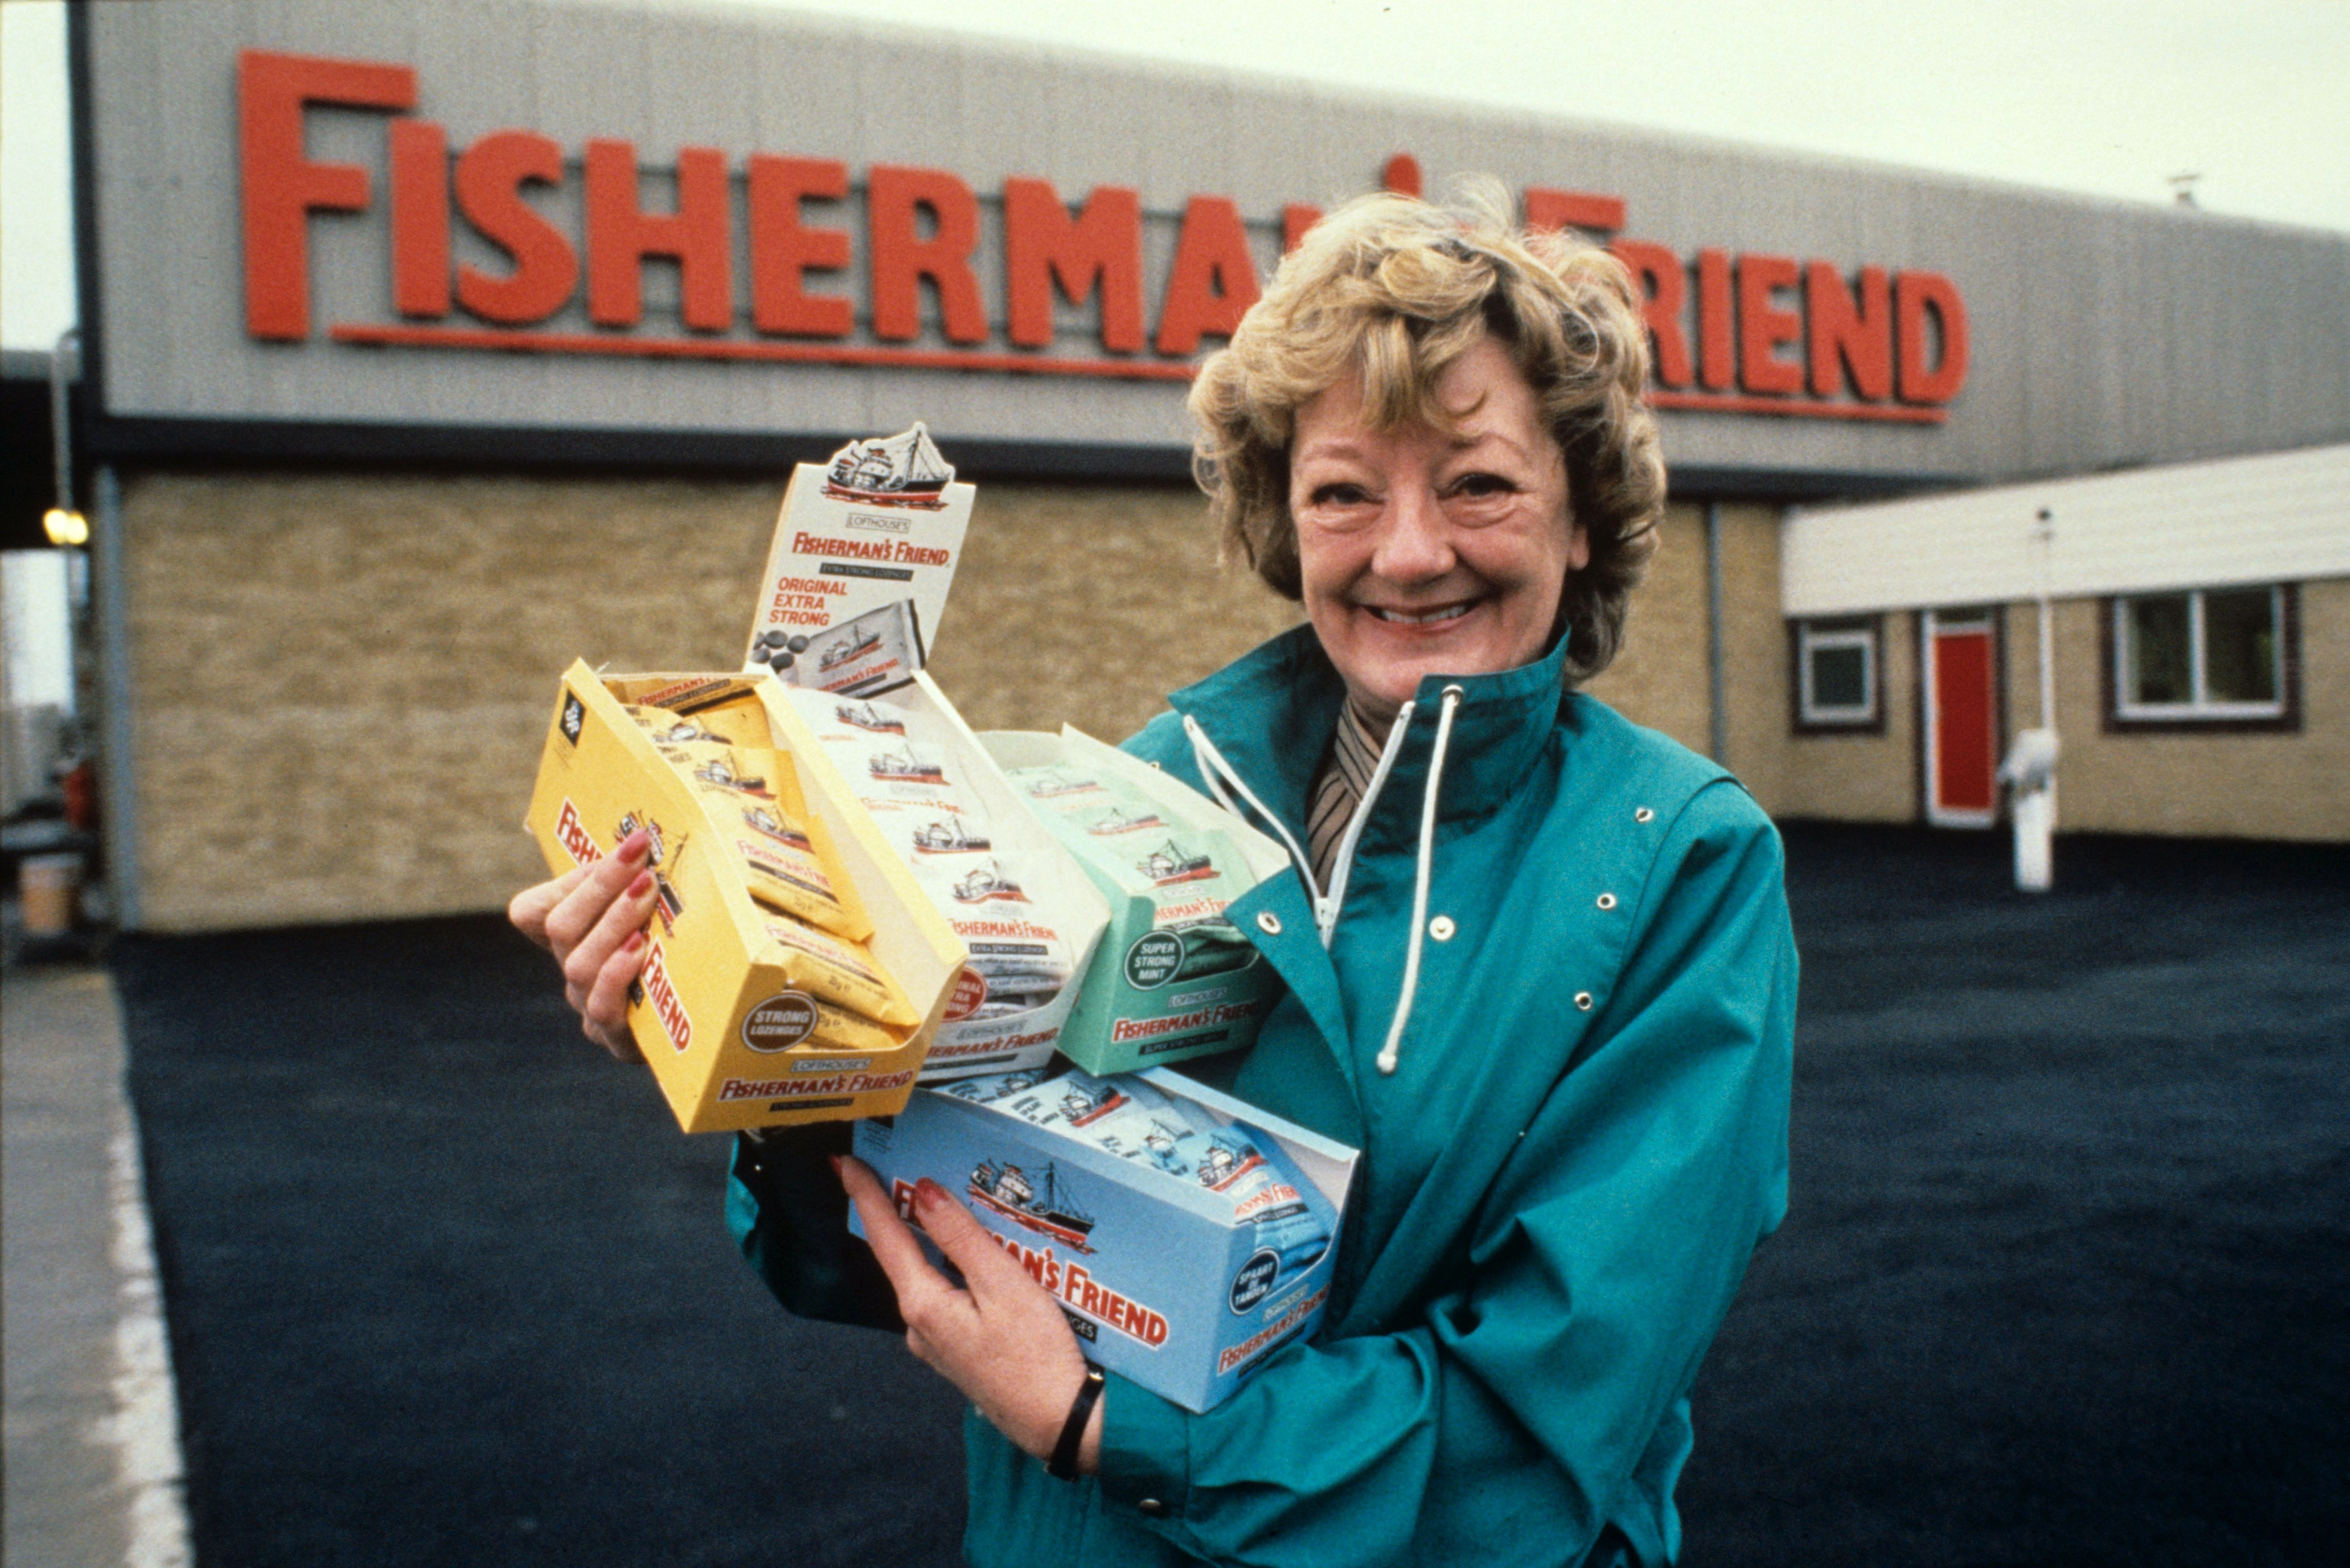 The history and origins of Fishermans Friend, including its development and early marketing strategies.